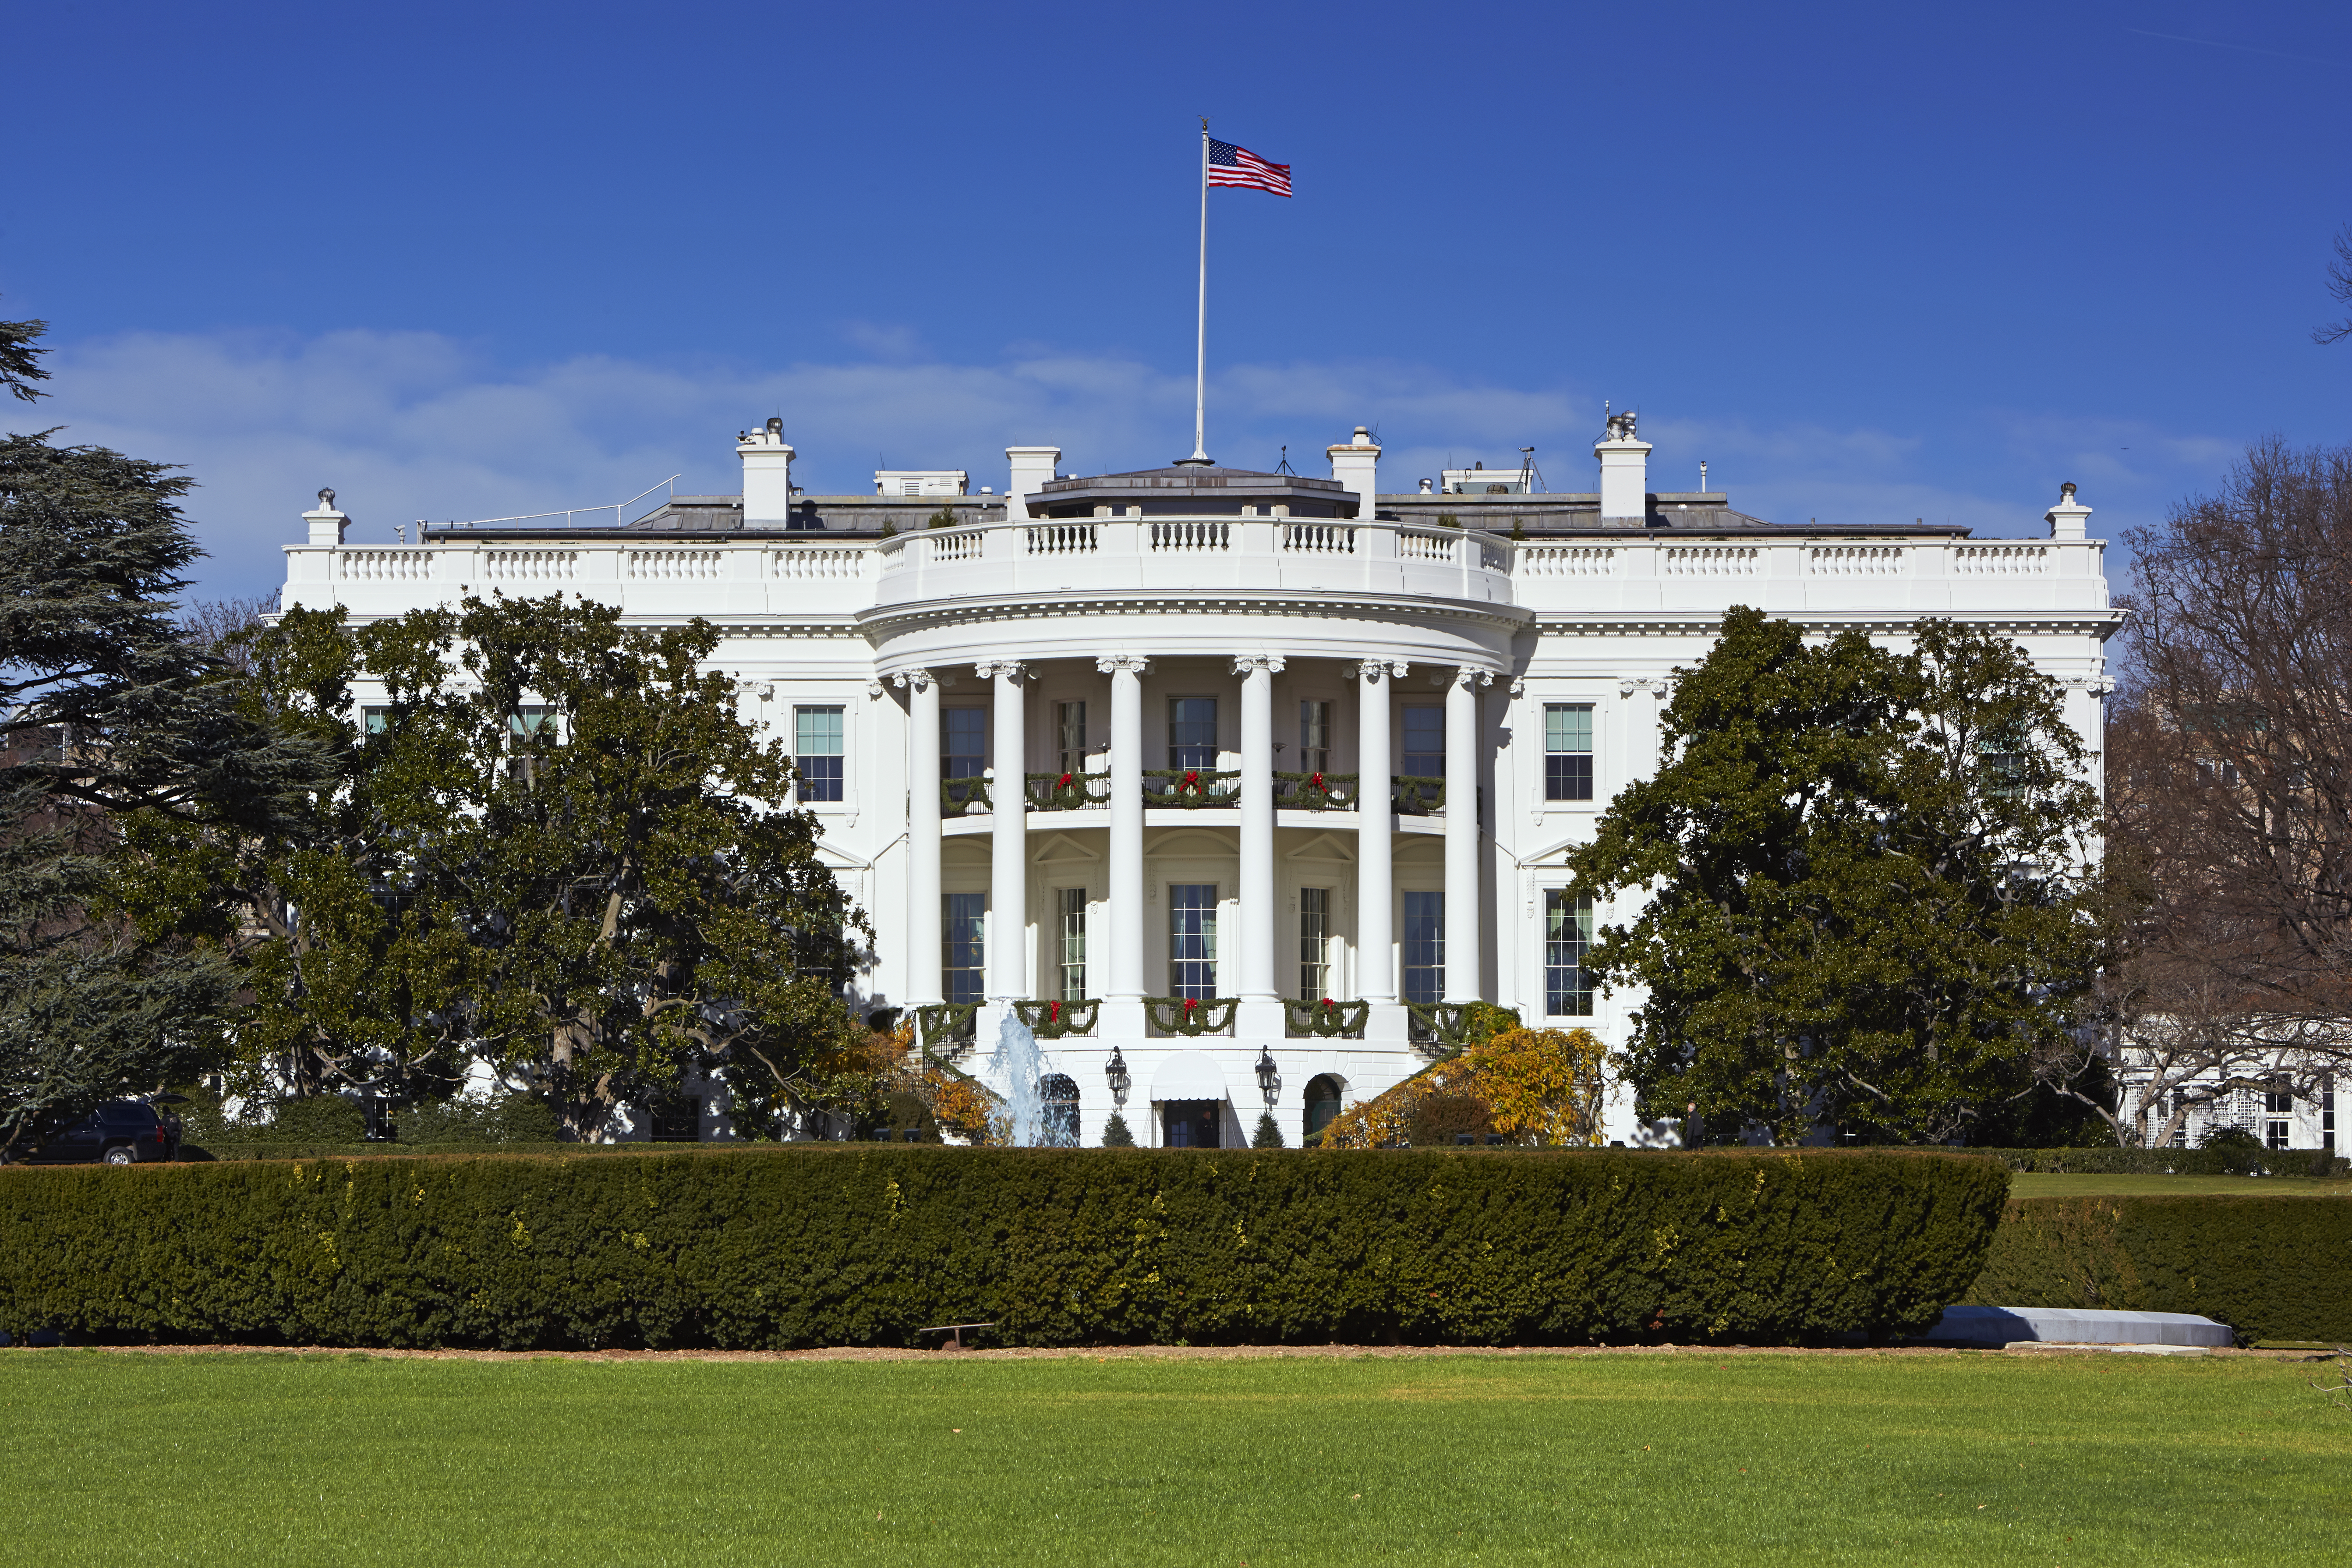 See How Much It Costs to Keep the White House Looking Great